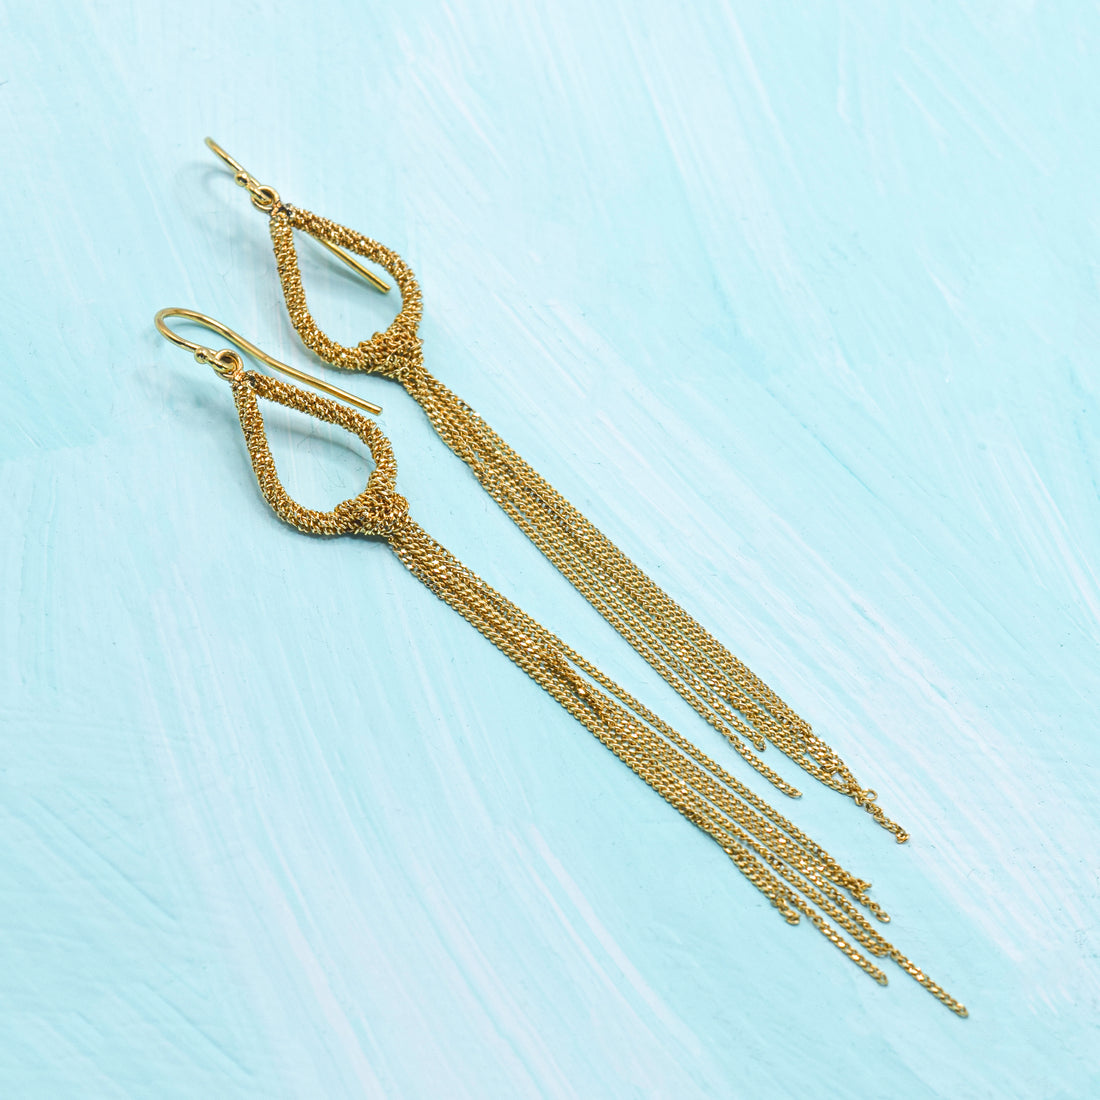 Amali Gold Woven "Knotted Marquise" Chain Drop Earrings